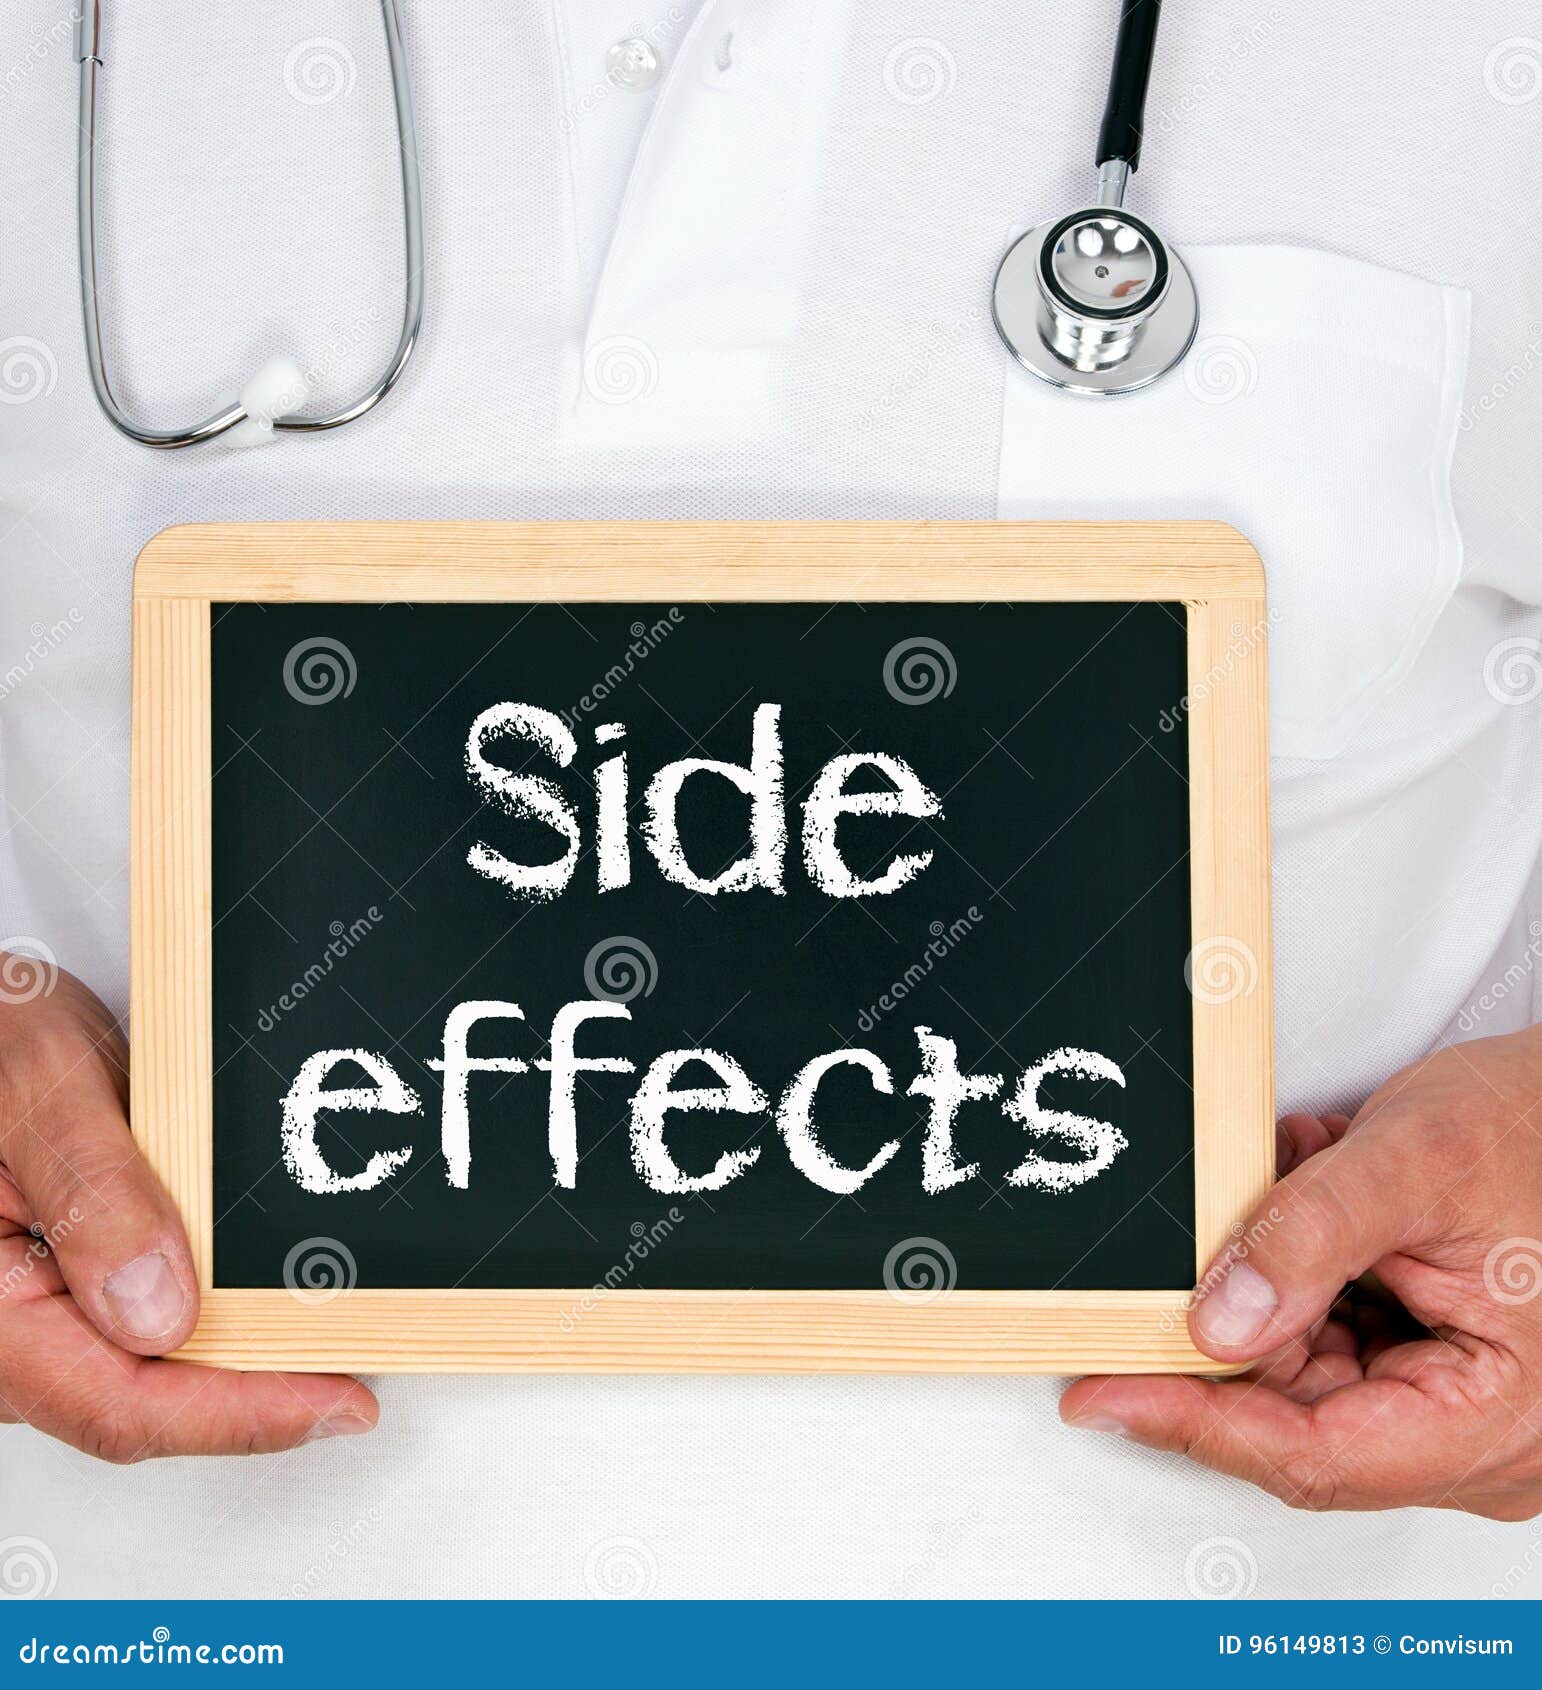 side effects - doctor holding chalkboard with text